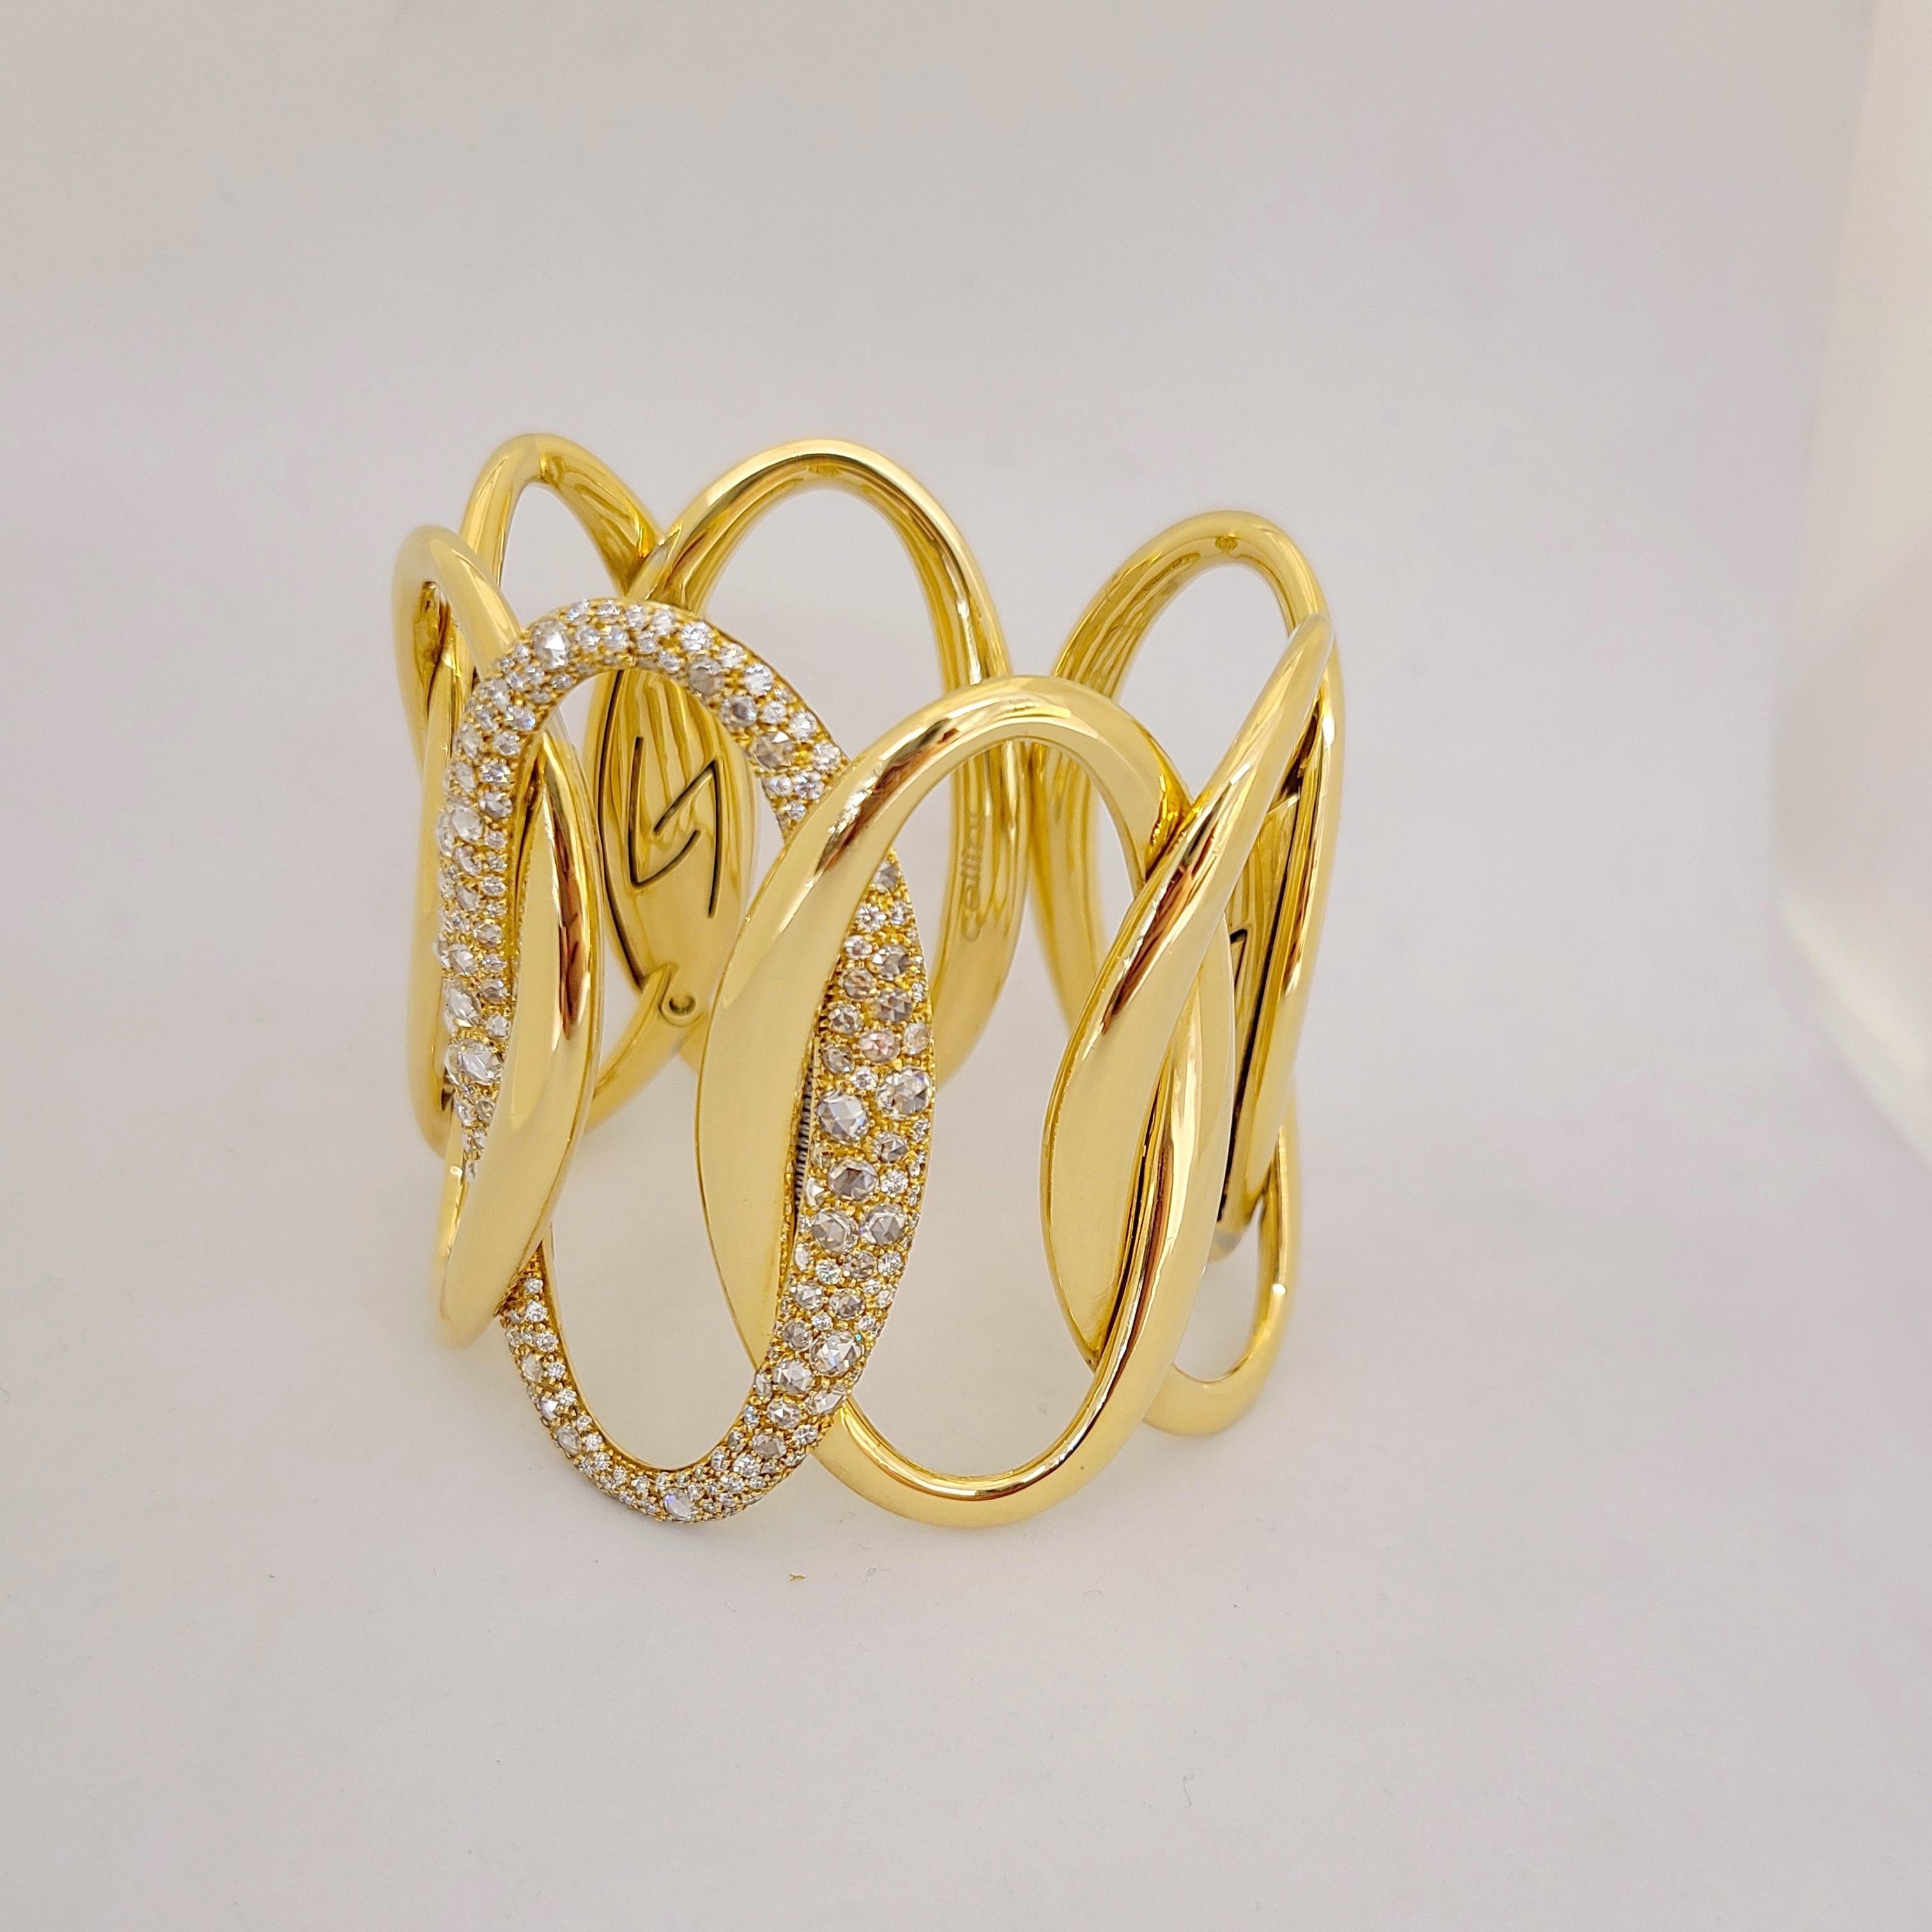 Made exclusively for Cellini NYC by g. Verdi of Italy, this 18 karat yellow gold and diamond cuff bracelet is a real showstopper. Interlocking links in a hi-polished yellow gold finish with the center link set entirely with rose cut and brilliant